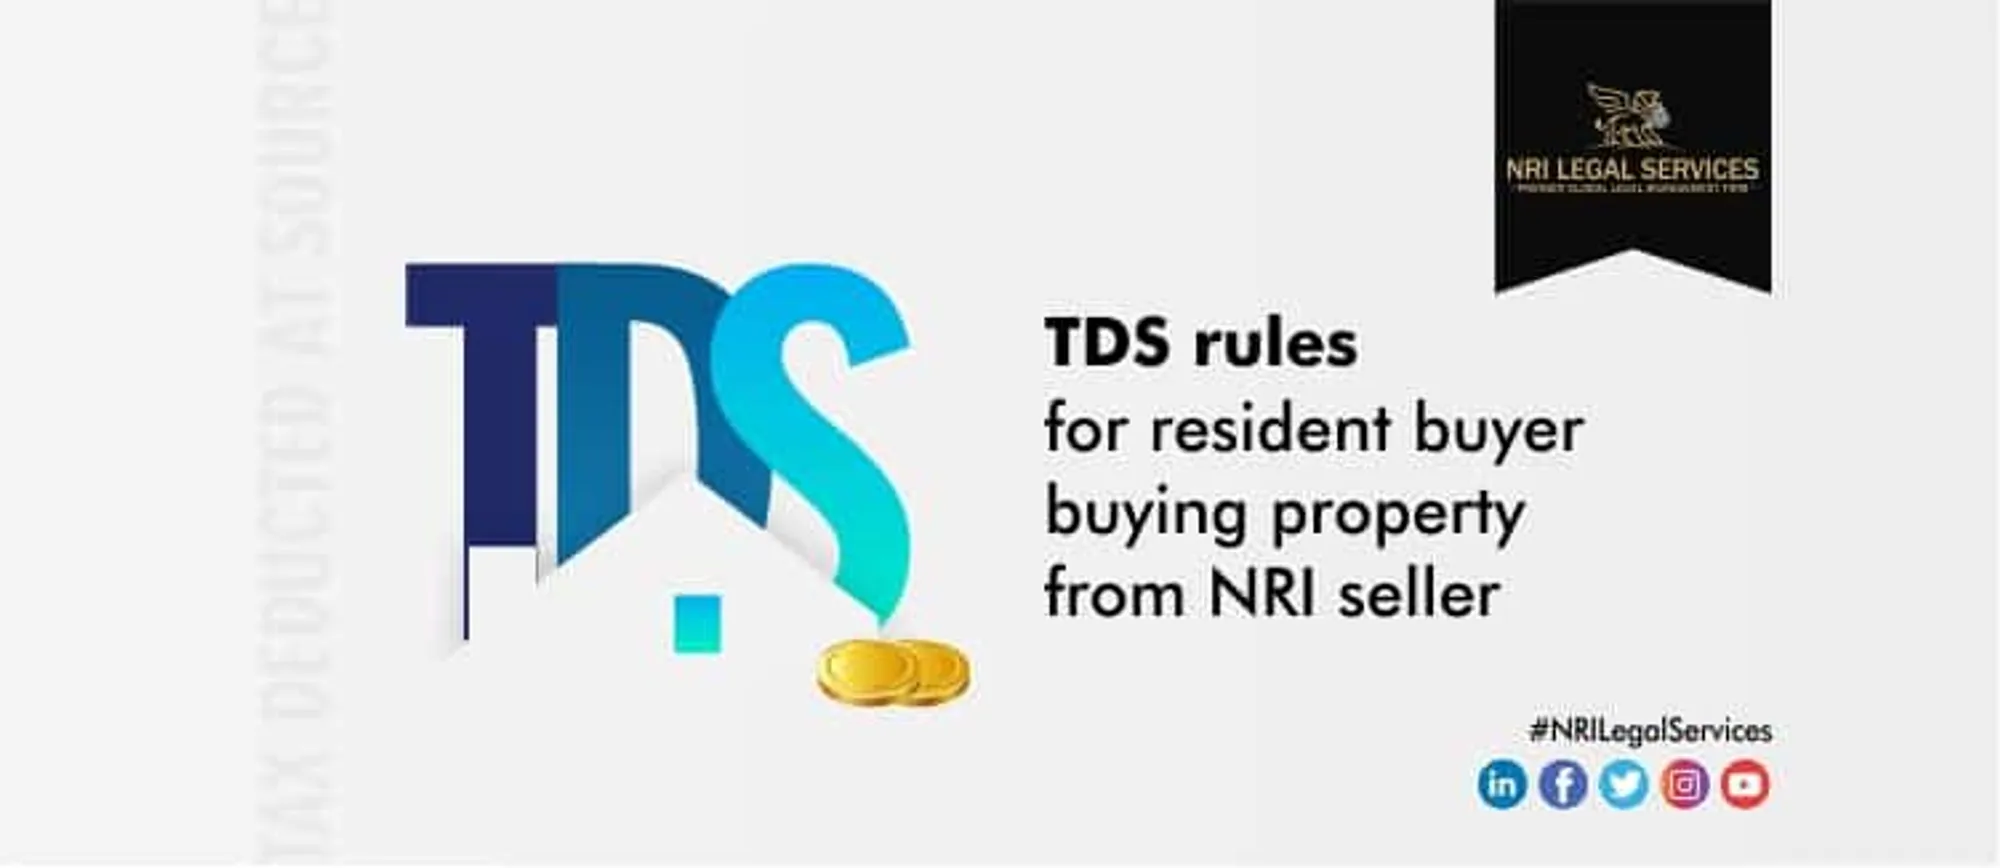 TDS rules for resident buyer buying property from NRI seller